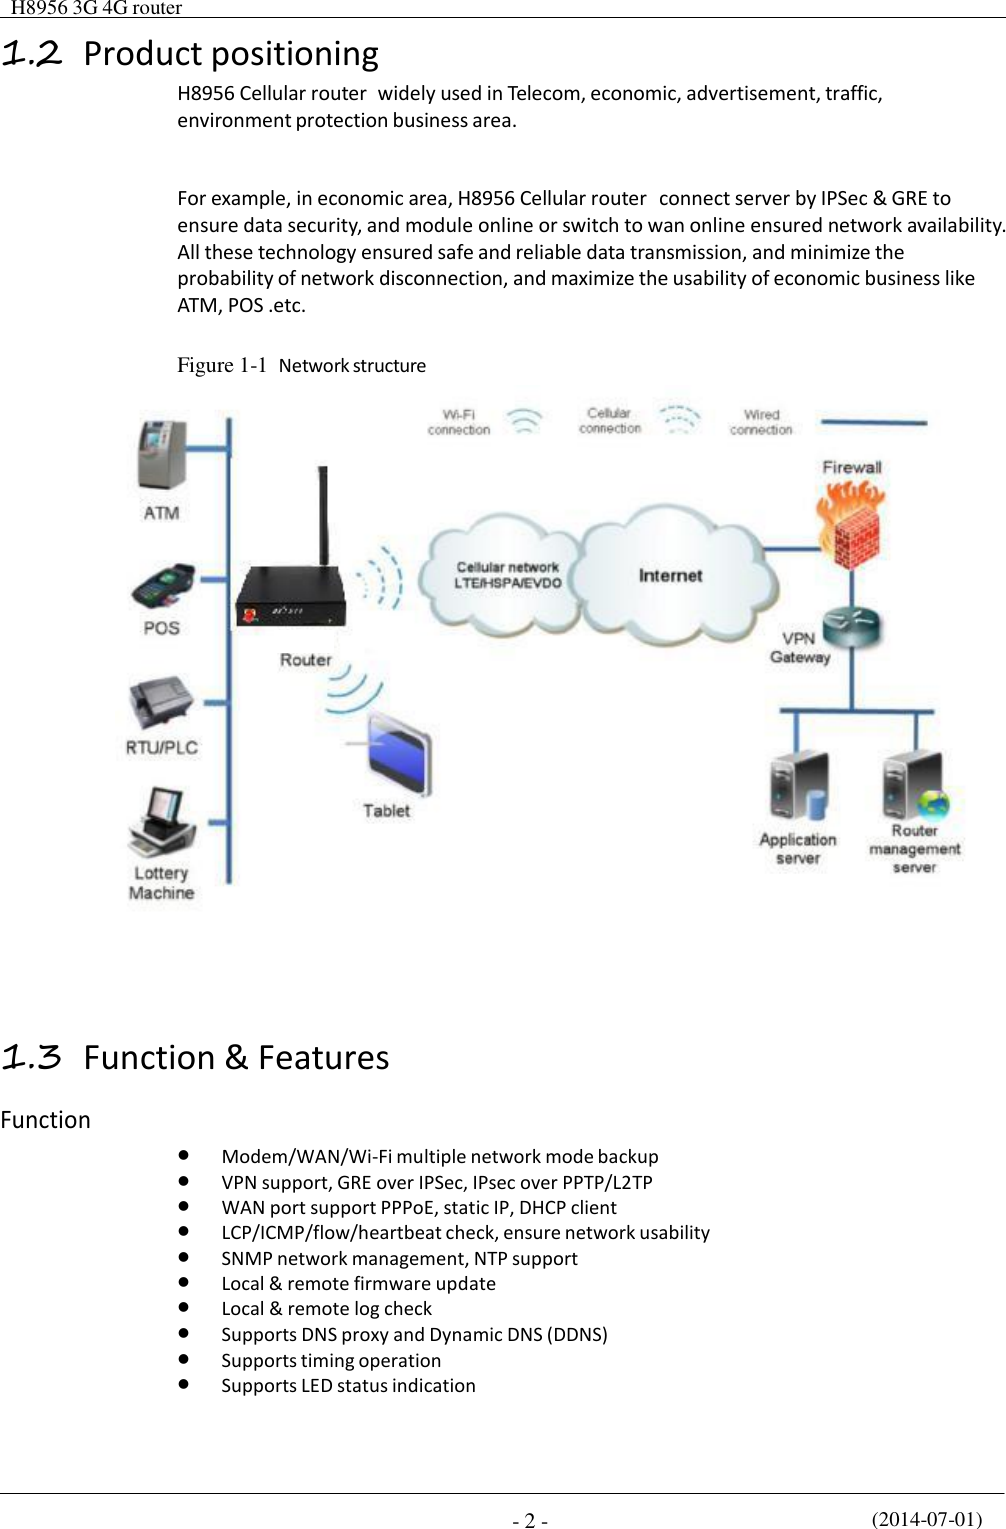  H8956 3G 4G router    (2014-07-01) - 2 -   1.2 Product positioning H8956 Cellular router  widely used in Telecom, economic, advertisement, traffic, environment protection business area.   For example, in economic area, H8956 Cellular router  connect server by IPSec &amp; GRE to ensure data security, and module online or switch to wan online ensured network availability. All these technology ensured safe and reliable data transmission, and minimize the probability of network disconnection, and maximize the usability of economic business like ATM, POS .etc.   Figure 1-1  Network structure       1.3 Function &amp; Features  Function    Modem/WAN/Wi-Fi multiple network mode backup  VPN support, GRE over IPSec, IPsec over PPTP/L2TP  WAN port support PPPoE, static IP, DHCP client  LCP/ICMP/flow/heartbeat check, ensure network usability  SNMP network management, NTP support  Local &amp; remote firmware update  Local &amp; remote log check  Supports DNS proxy and Dynamic DNS (DDNS)  Supports timing operation  Supports LED status indication 